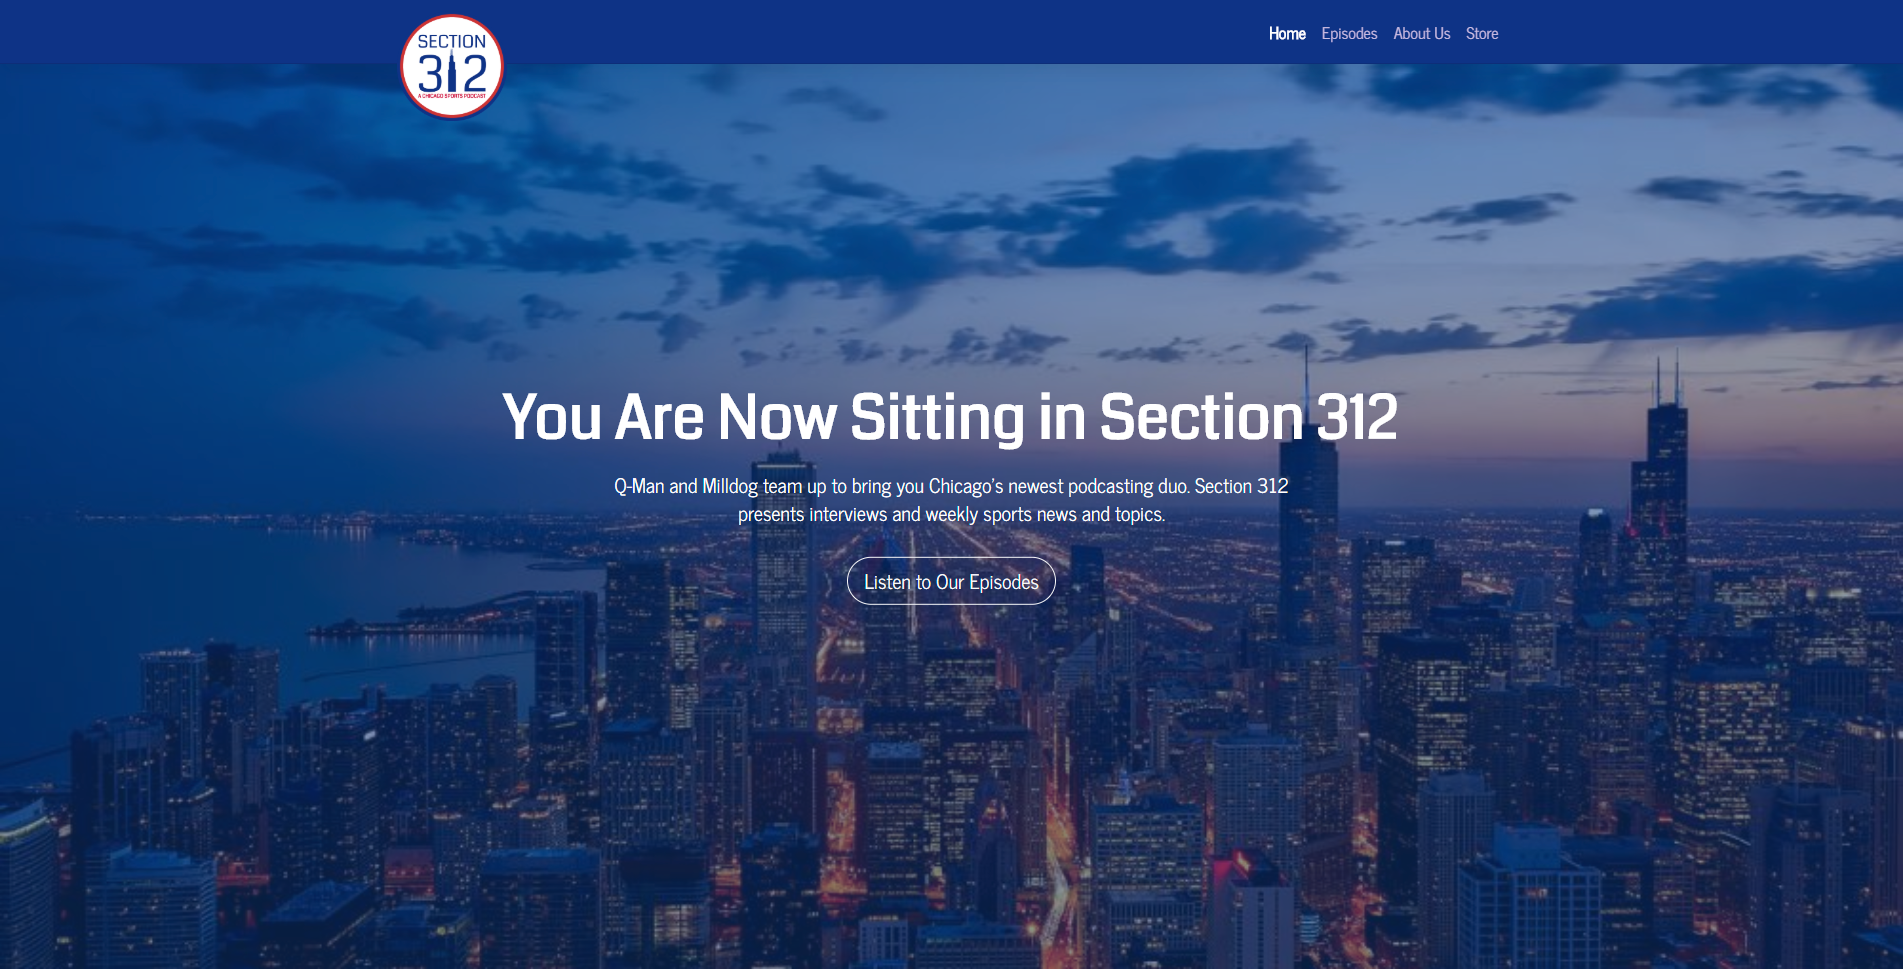 Section 312 website